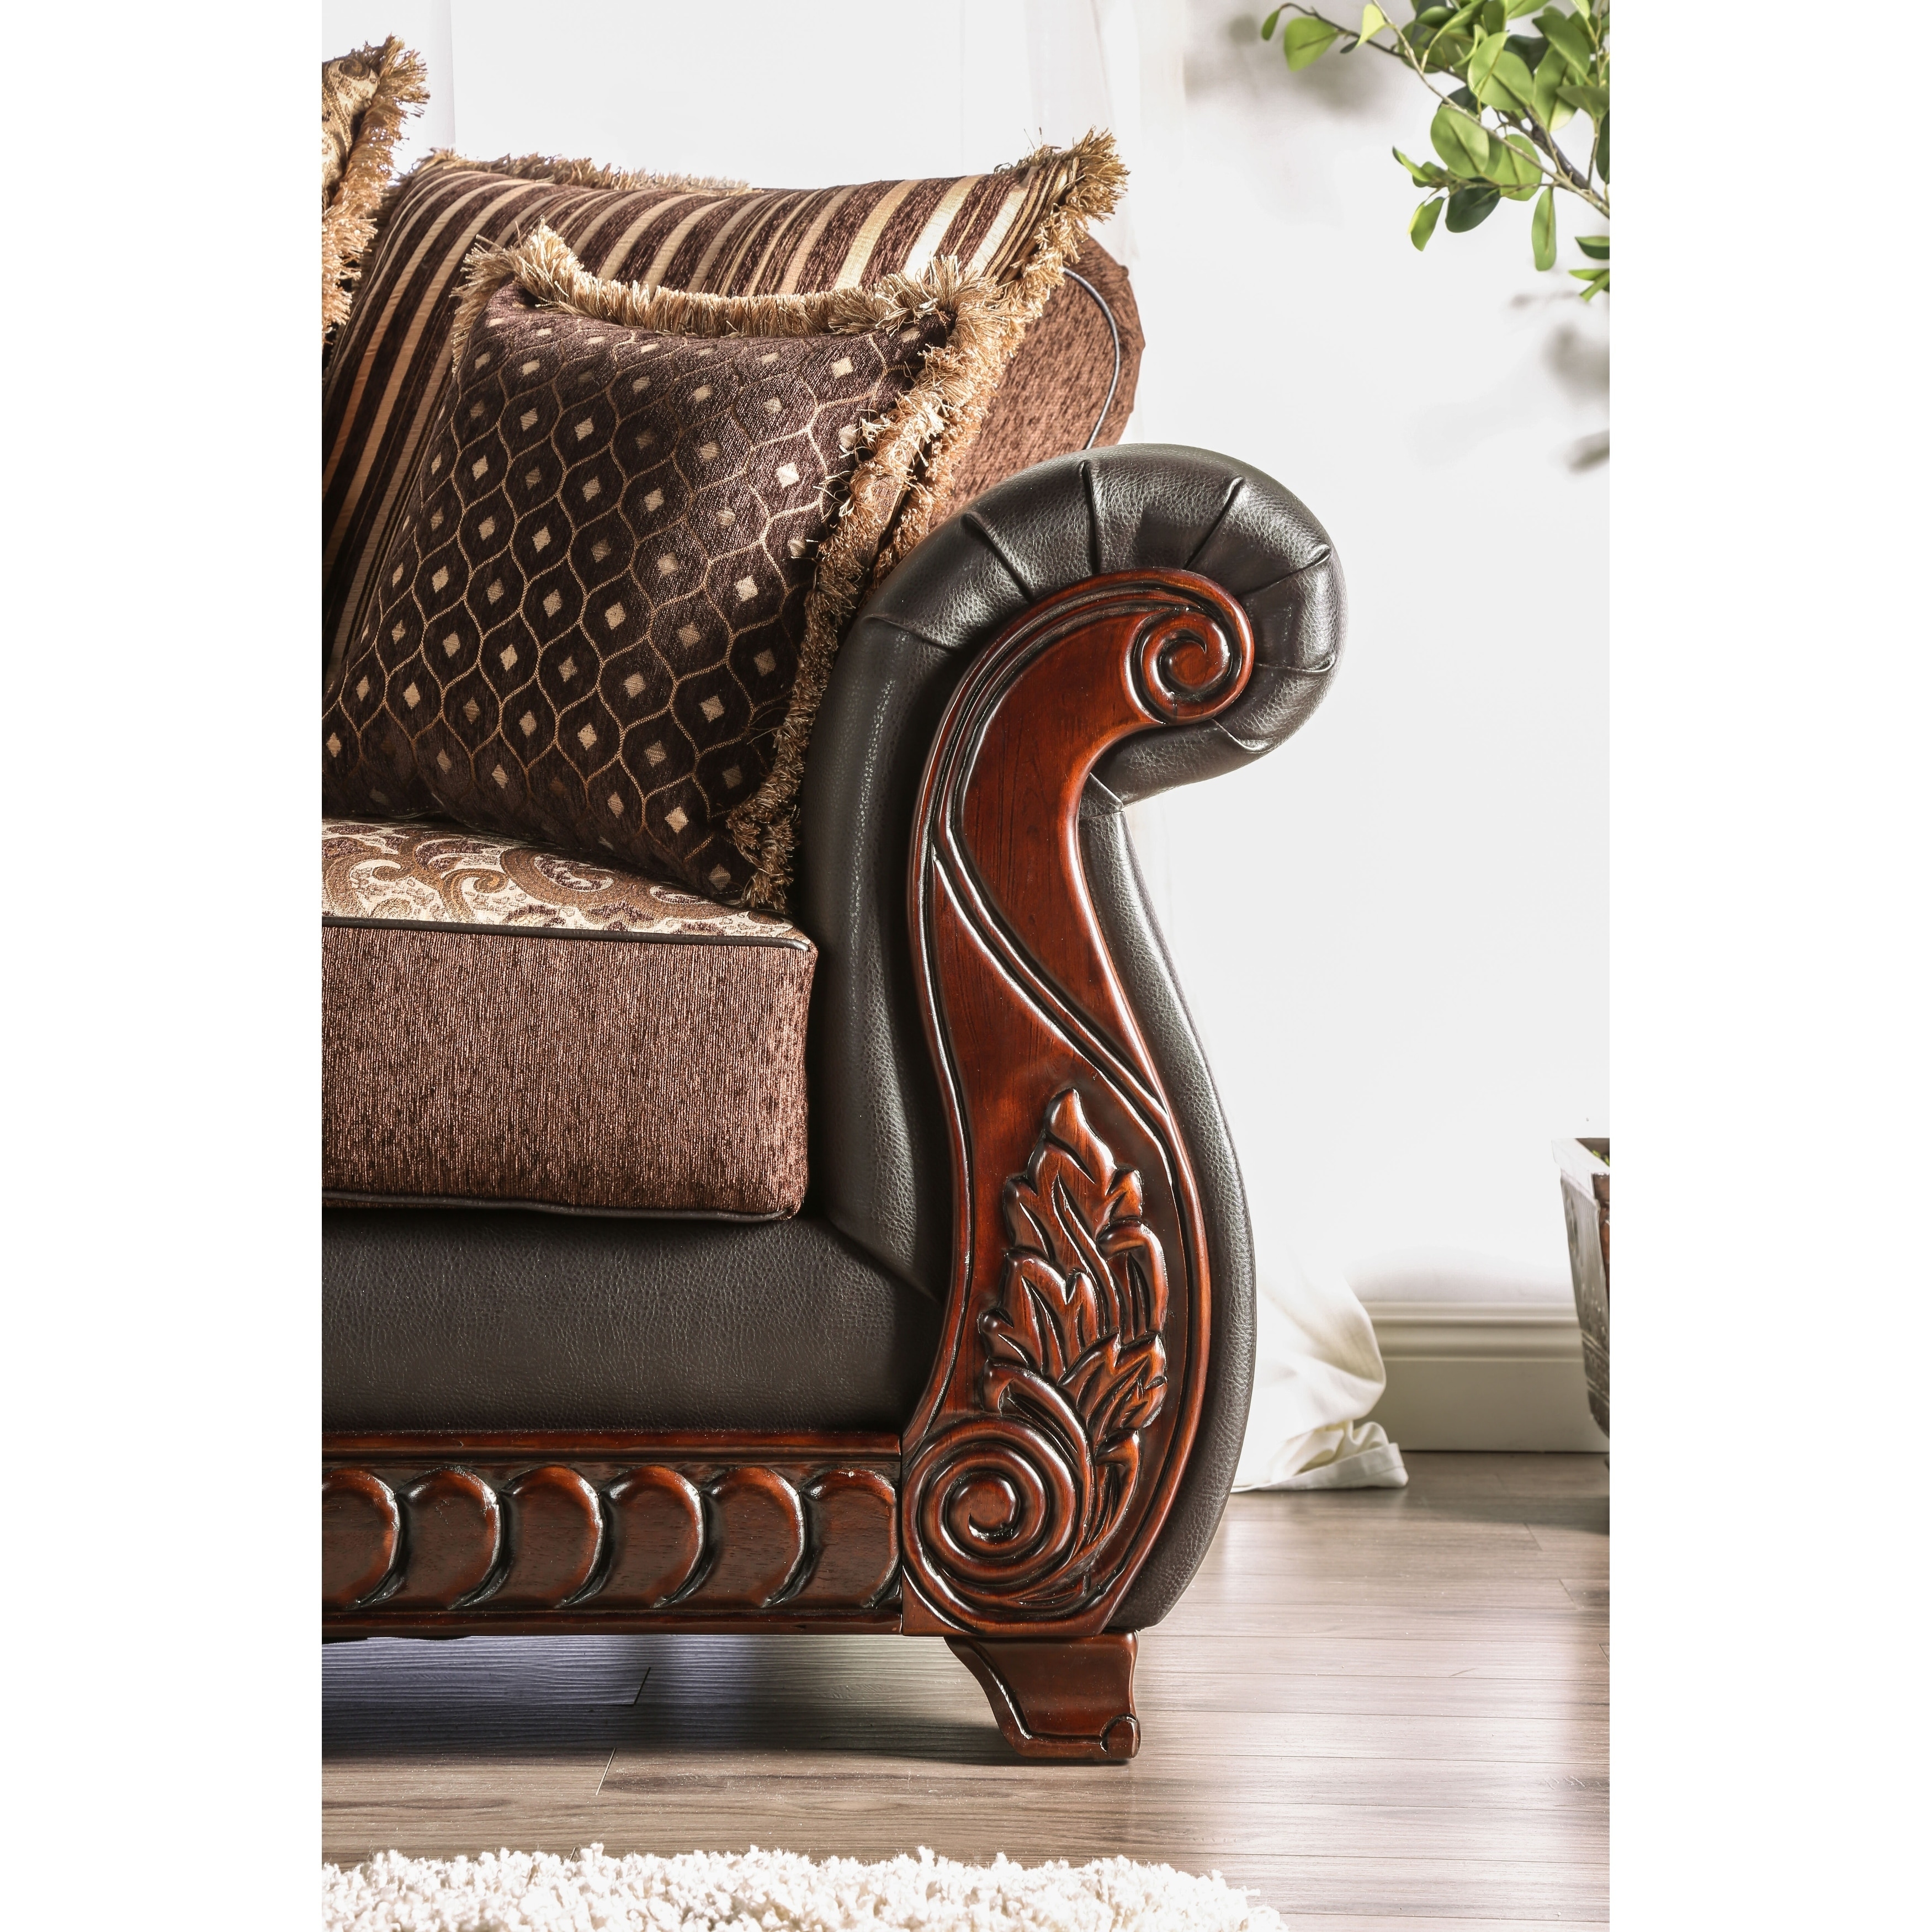 by - 2-Piece & On Corz of - Traditional Furniture Faux Bed - America Brown 8942332 Set Bath Beyond Sale Leather Sofa